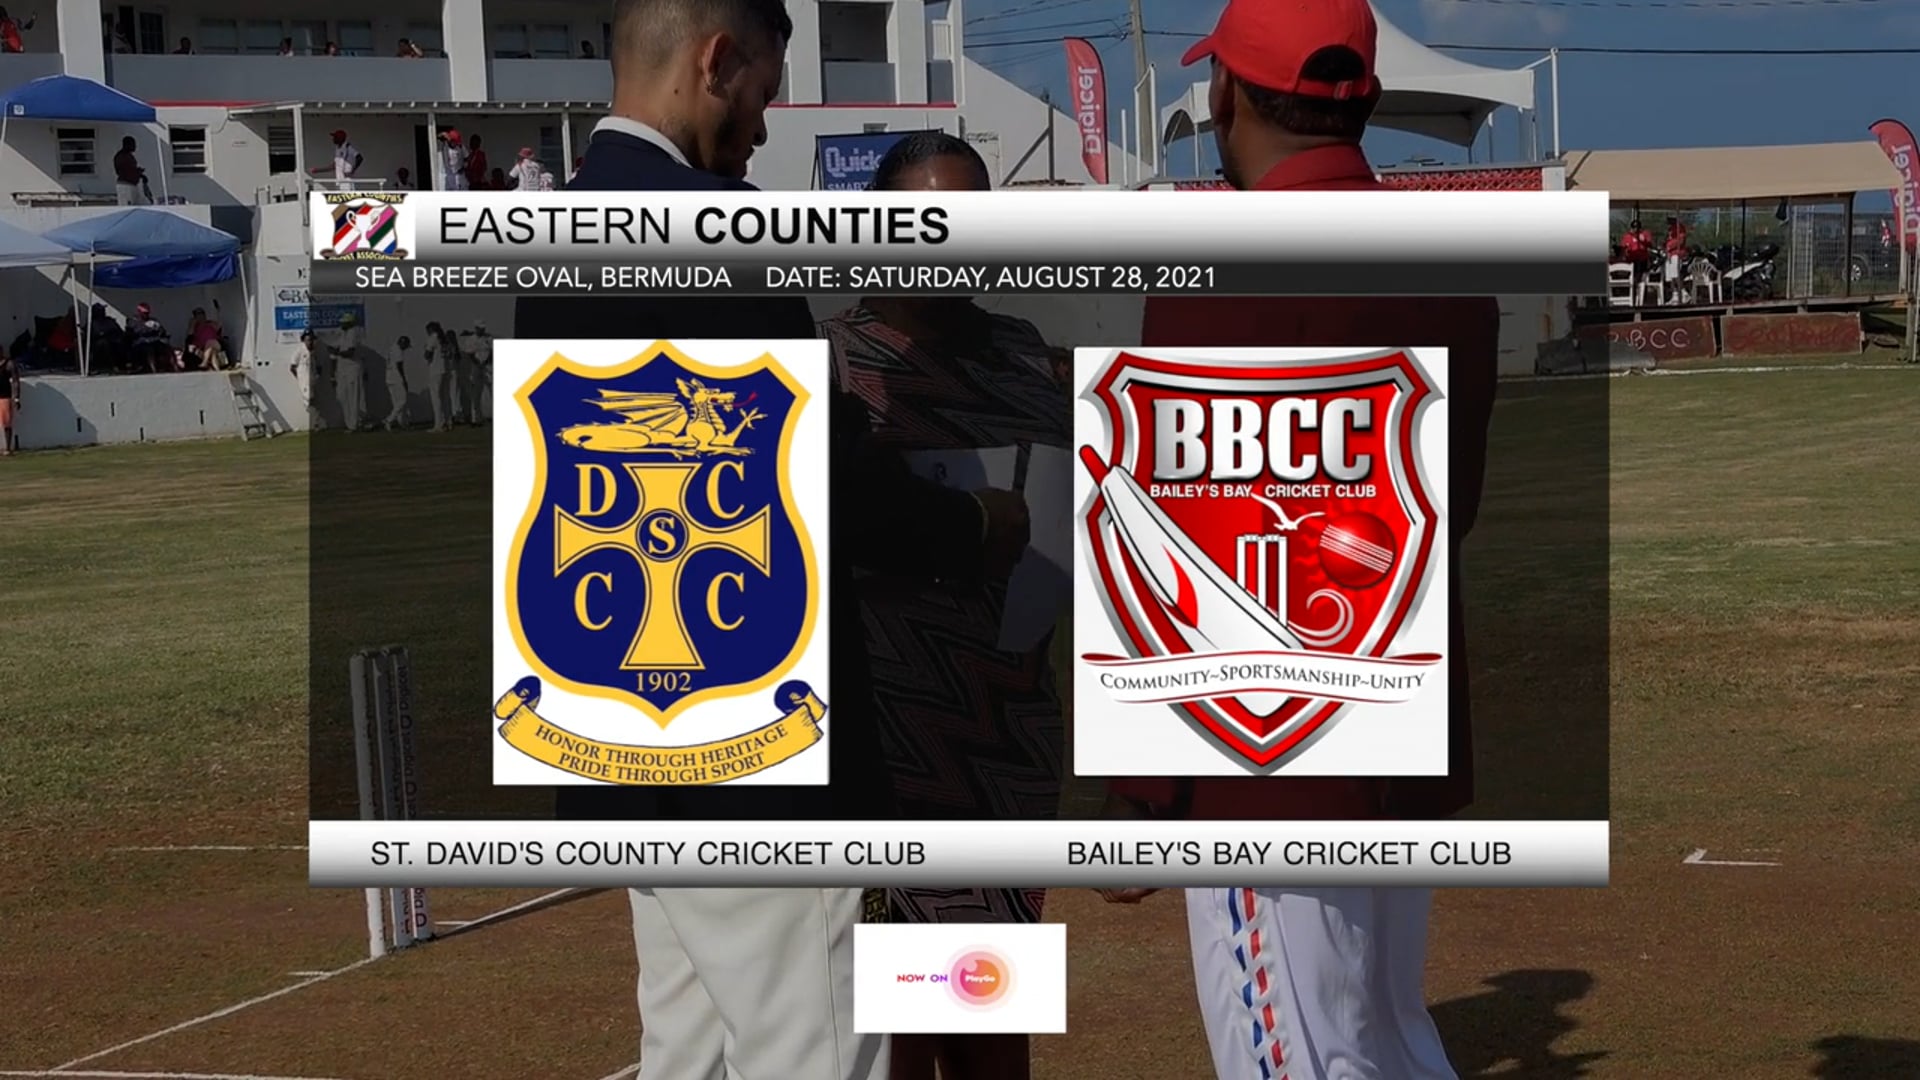 Bailey's Bay Cricket Club vs St. David's County Cricket Club_Eastern Counties Final Round_Highlights_28_August_2021.mov